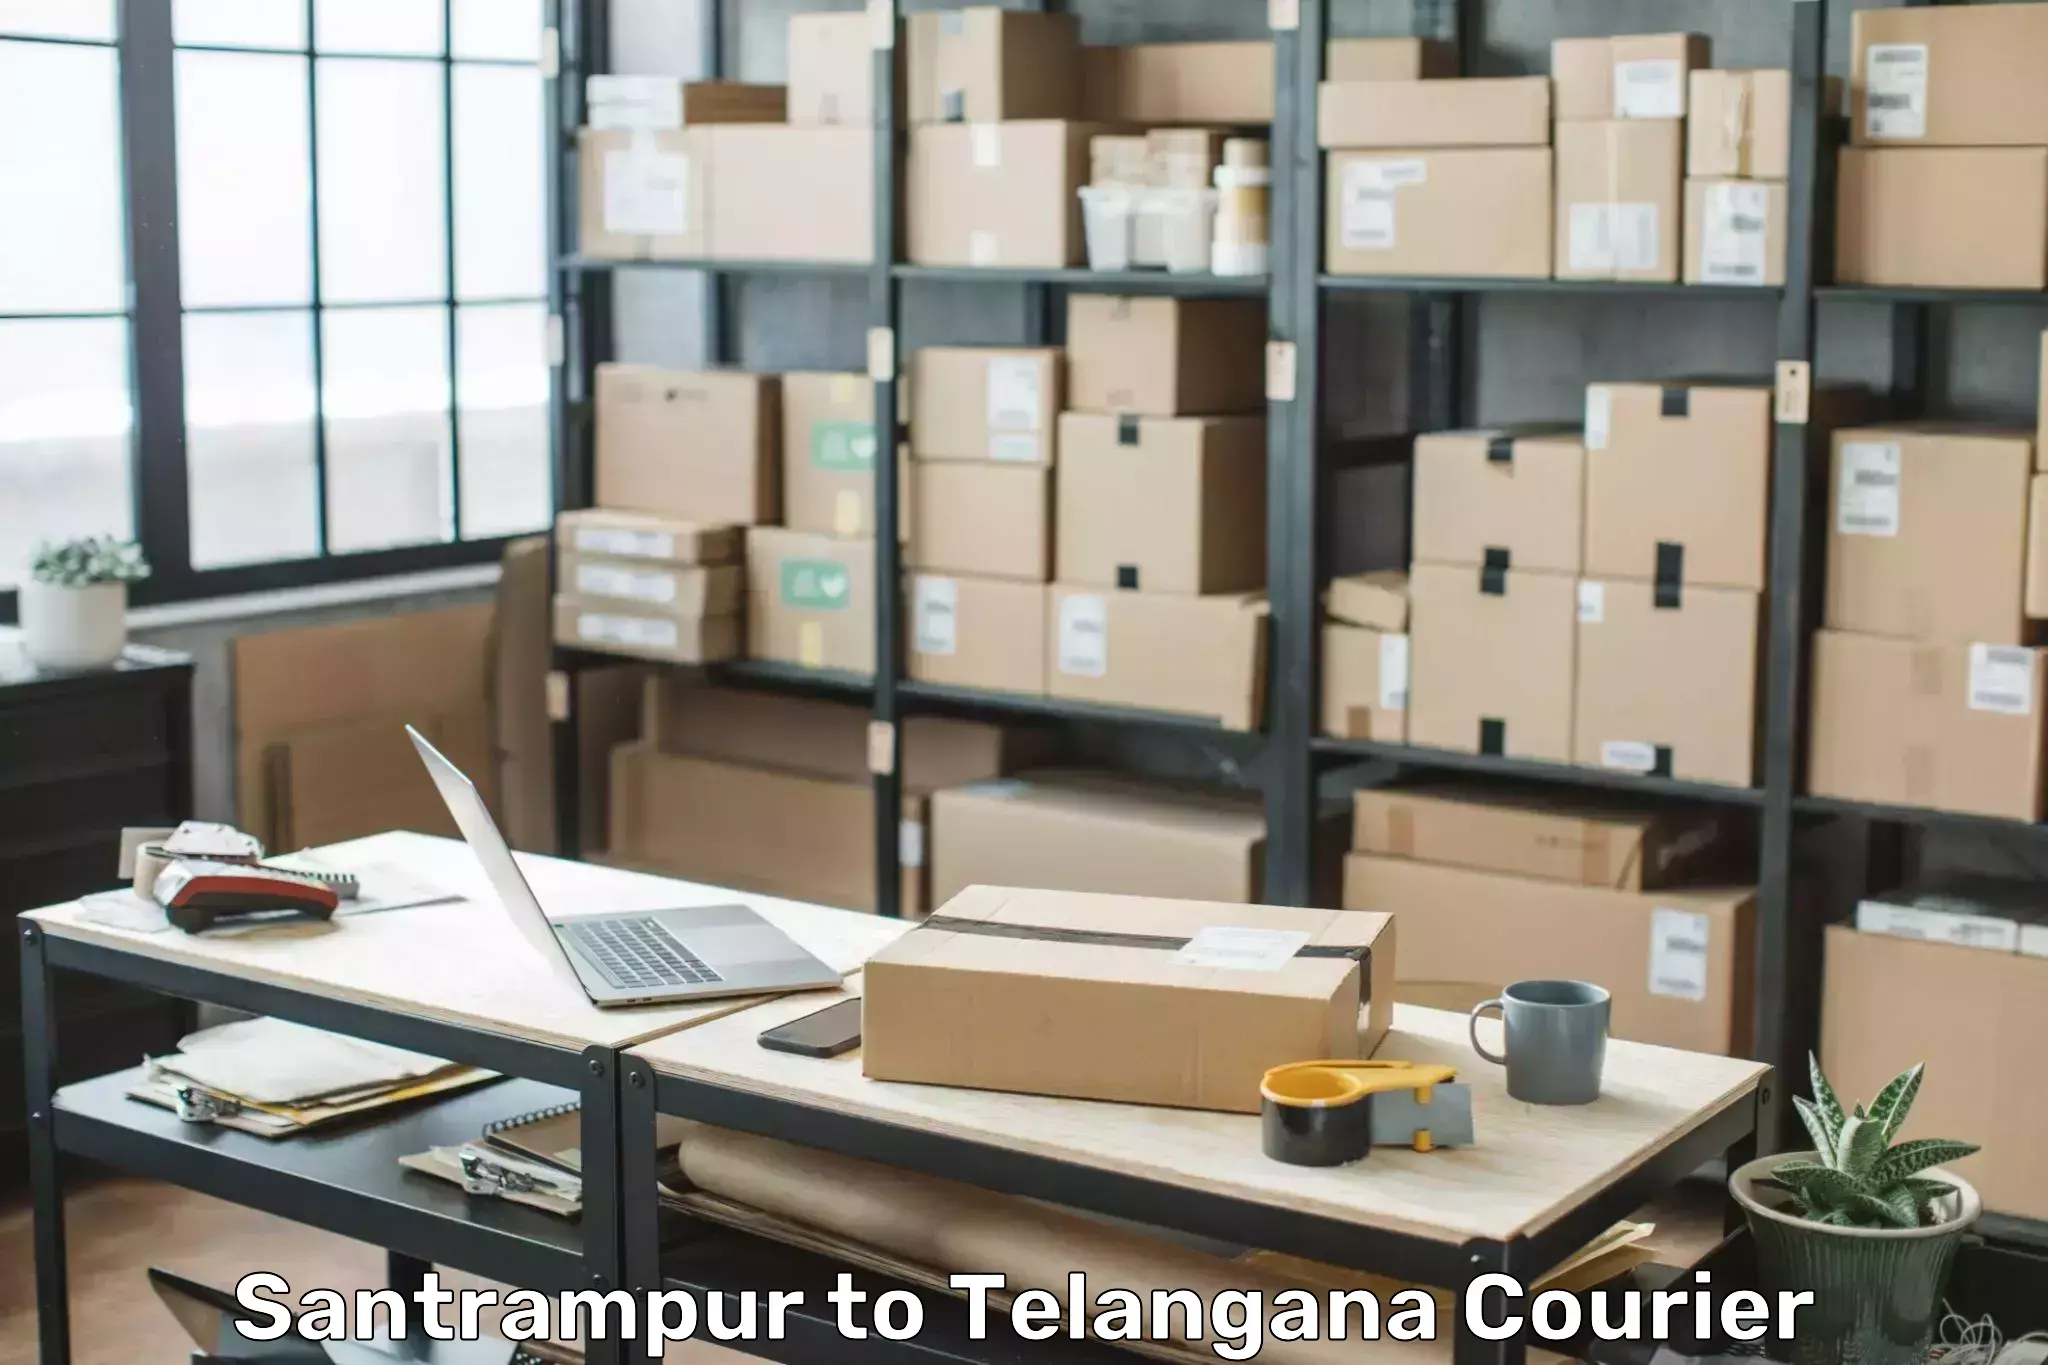 Instant baggage transport quote Santrampur to Gollapalli